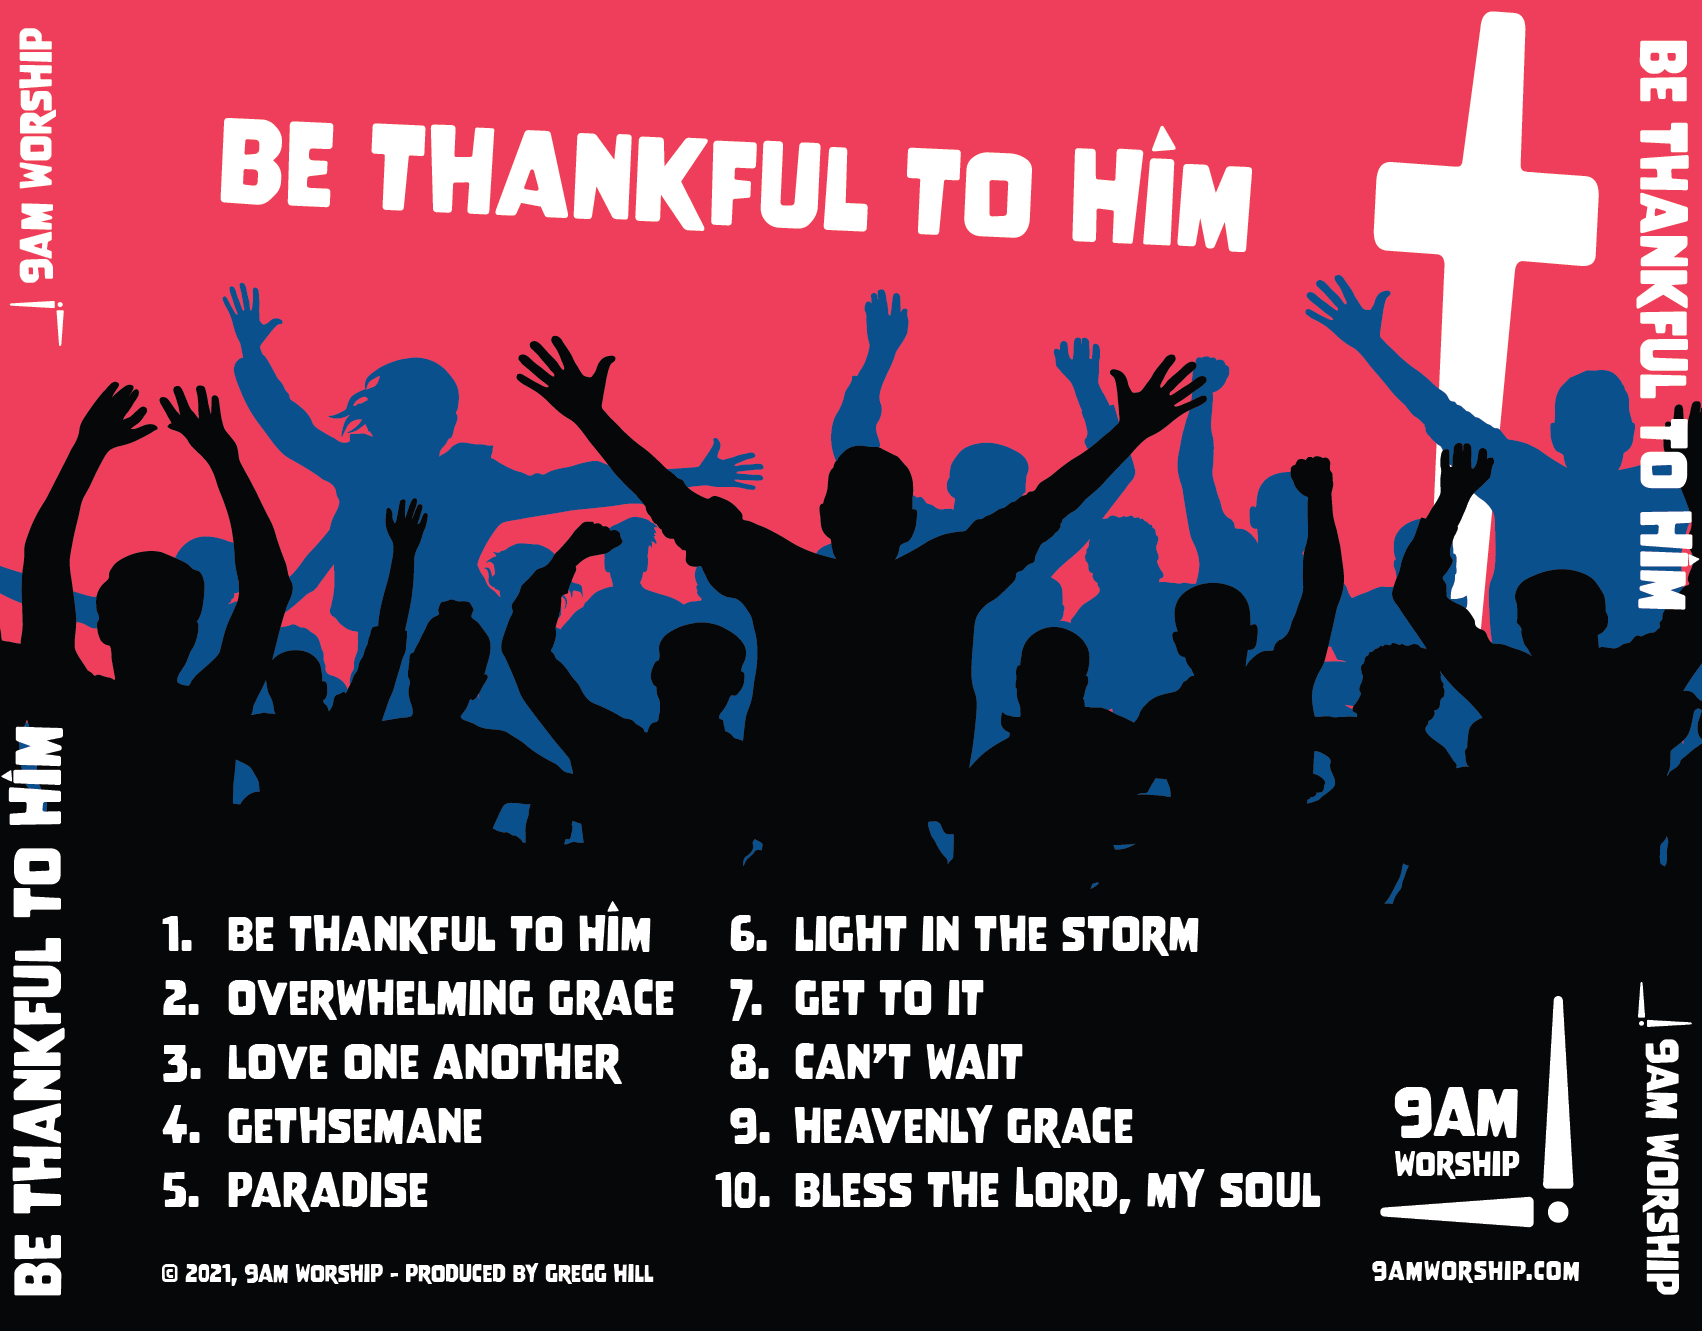 Album back for "be thankful to Him" by 9am worship